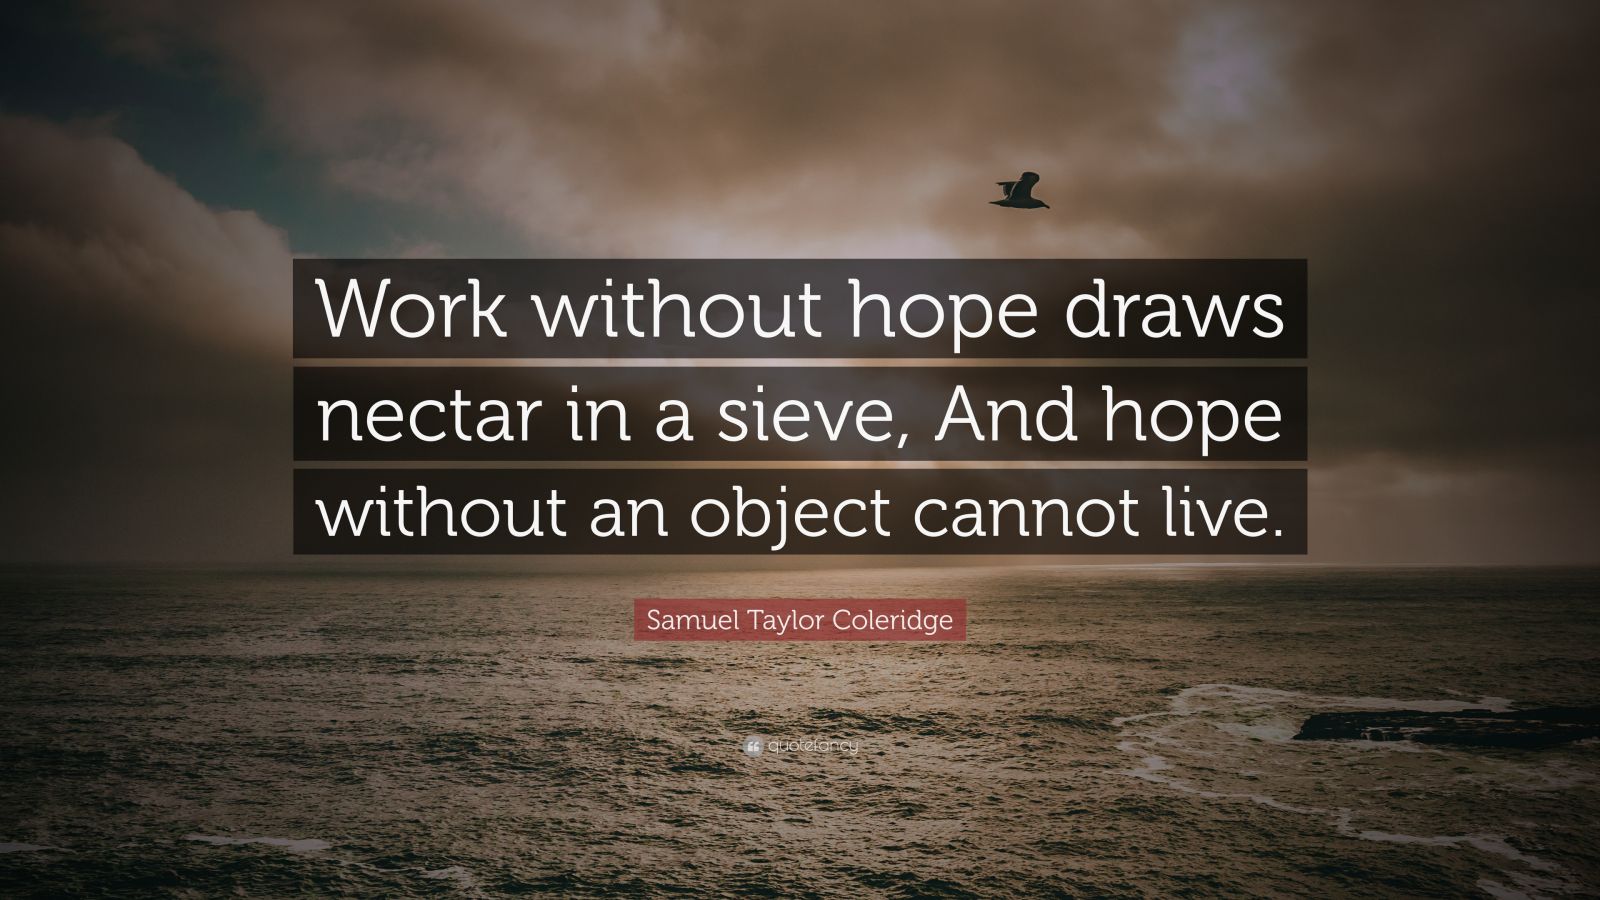 Samuel Taylor Coleridge Quote: “Work without hope draws nectar in a sieve, And hope ...1600 x 900